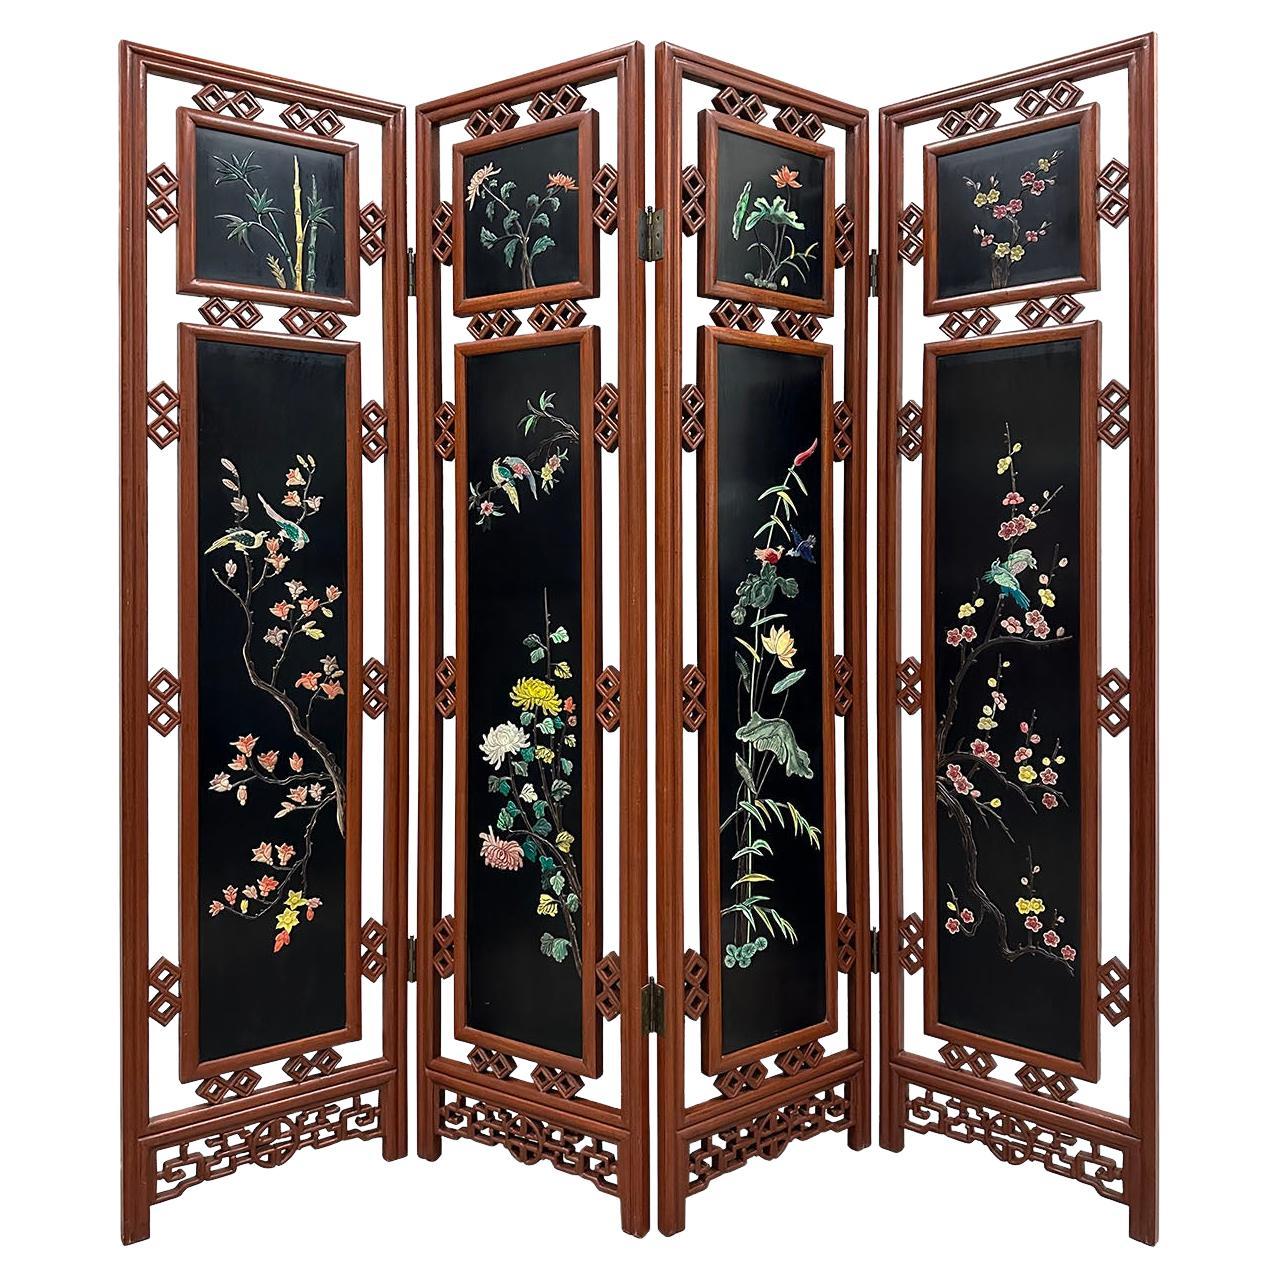 Mid-20th Century Chinese Hardwood Folding Screen/Room Divider with Soapstone Inl